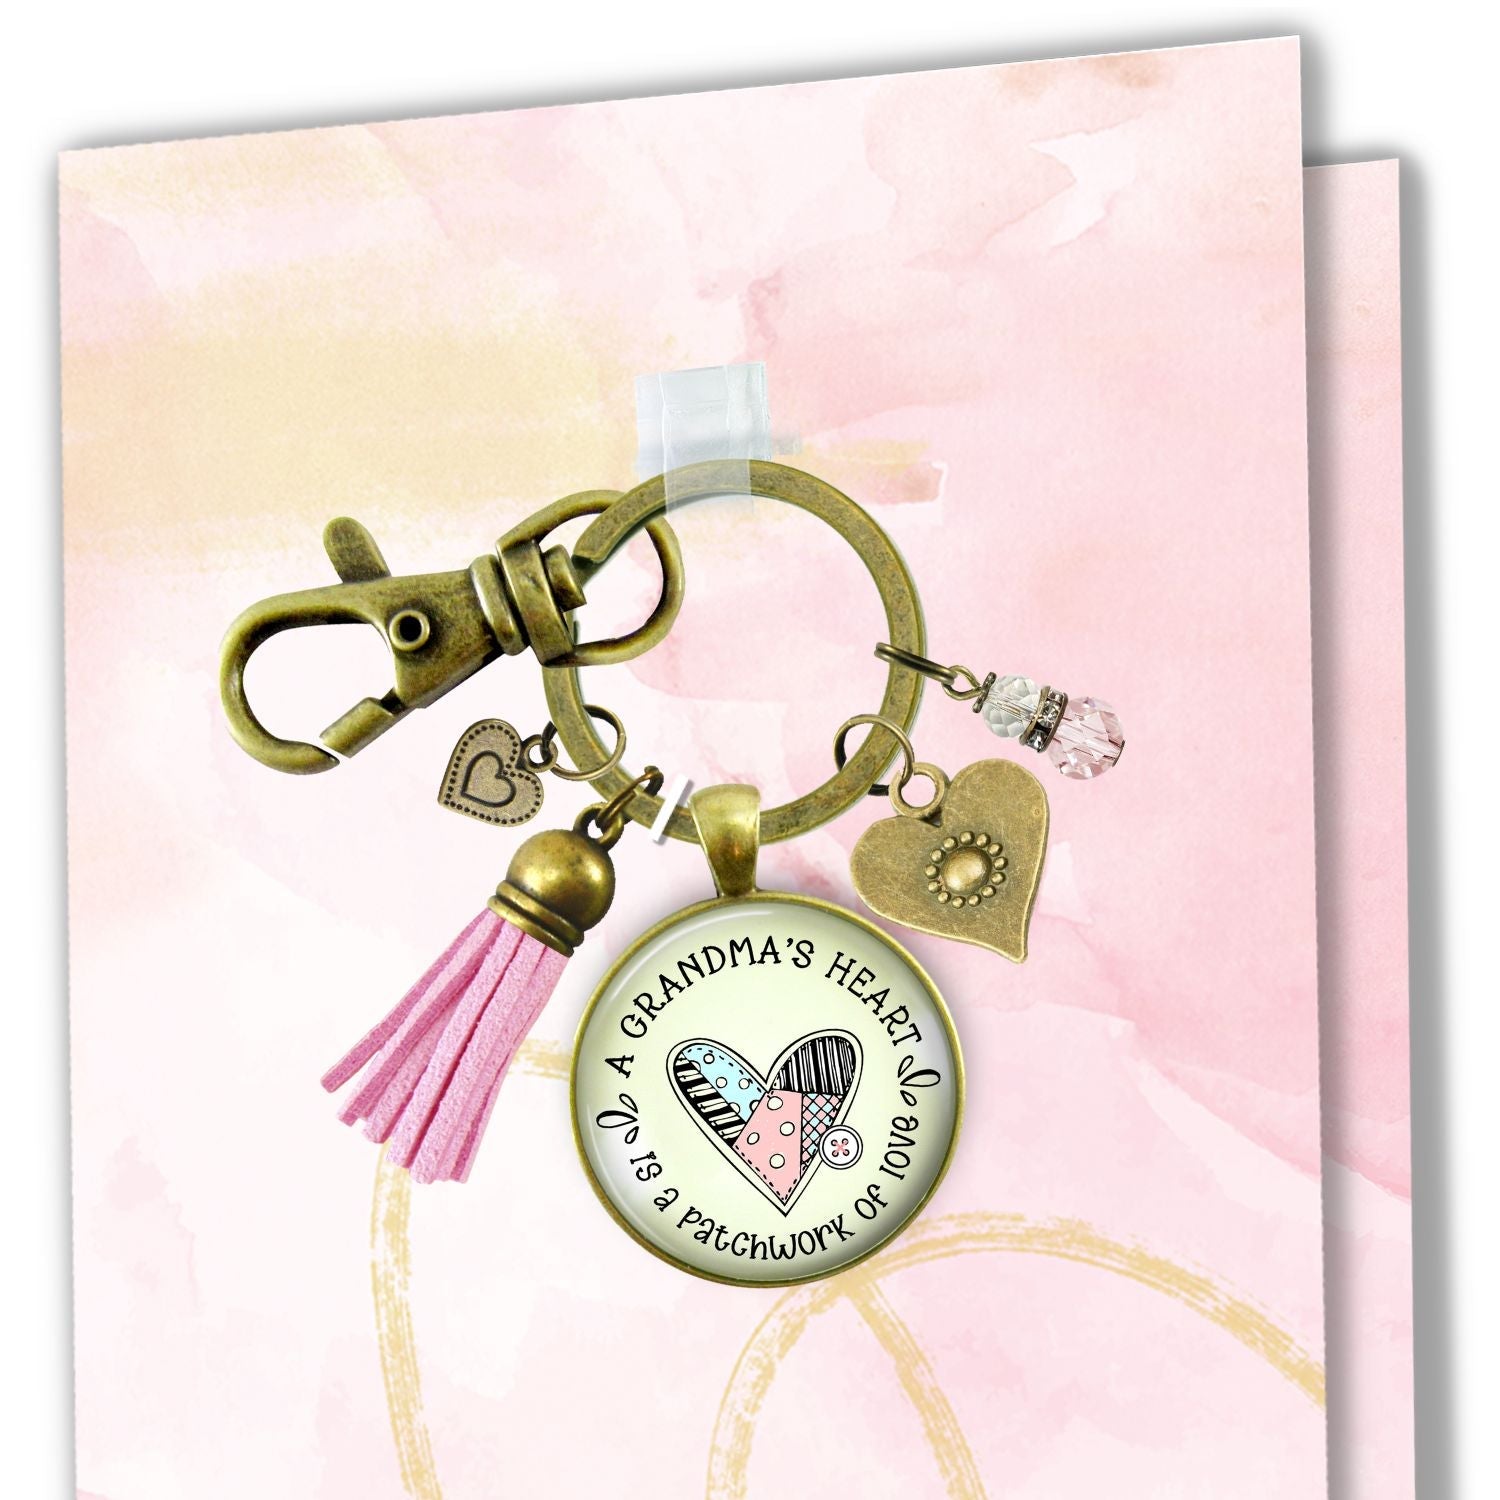 Handmade Gutsy Goodness Jewelry Grandmother Keychain Gift Grandma's Heart Is A Patchwork of Love Jewelry, Tassel & Meaningful Card